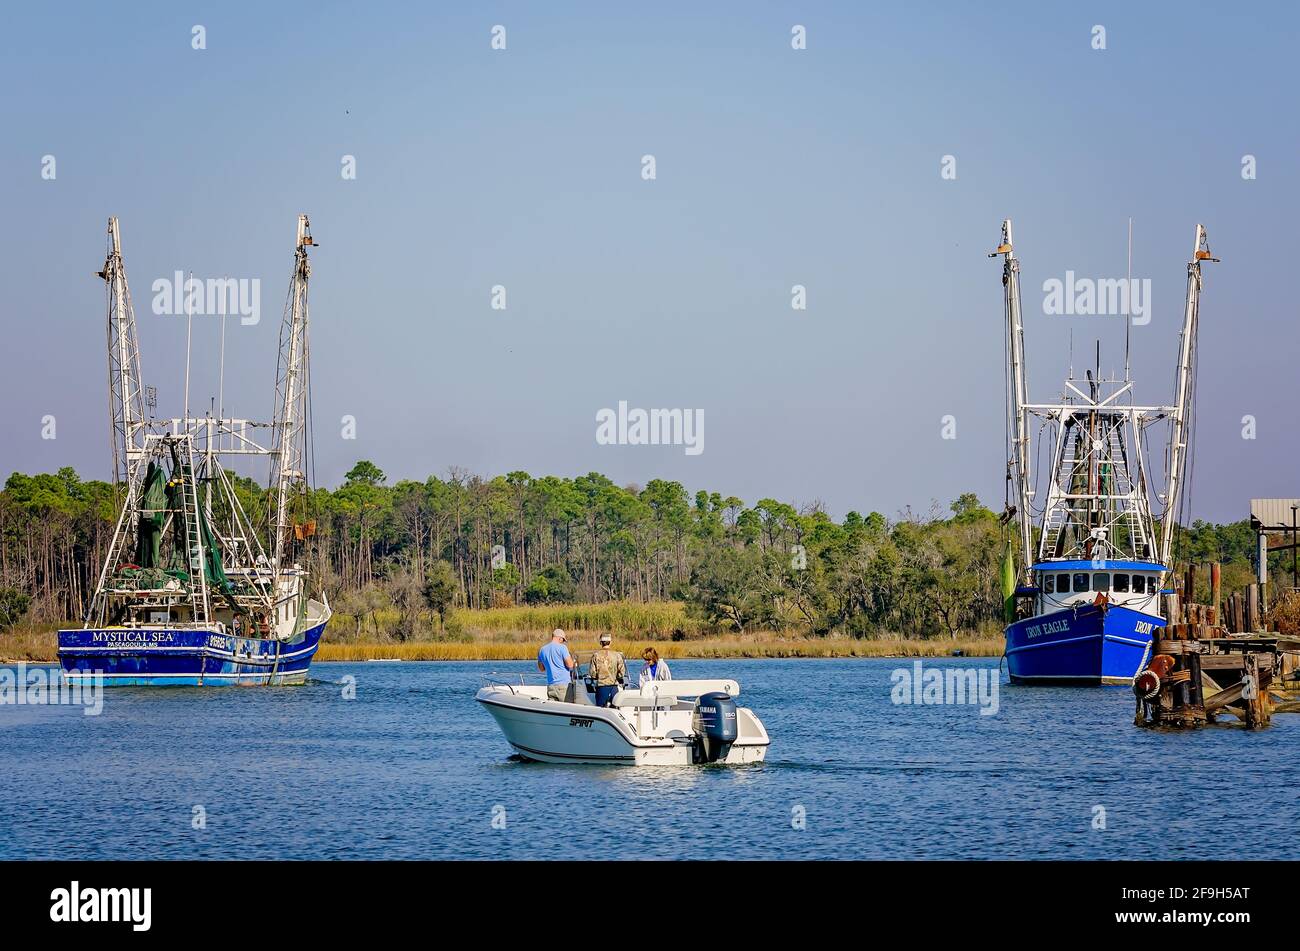 A family in a fishing boat passes between two shrimp boats, “Mystical Sea” and “Iron Eagle”, Nov. 23, 2012, in Bayou La Batre, Alabama. Stock Photo